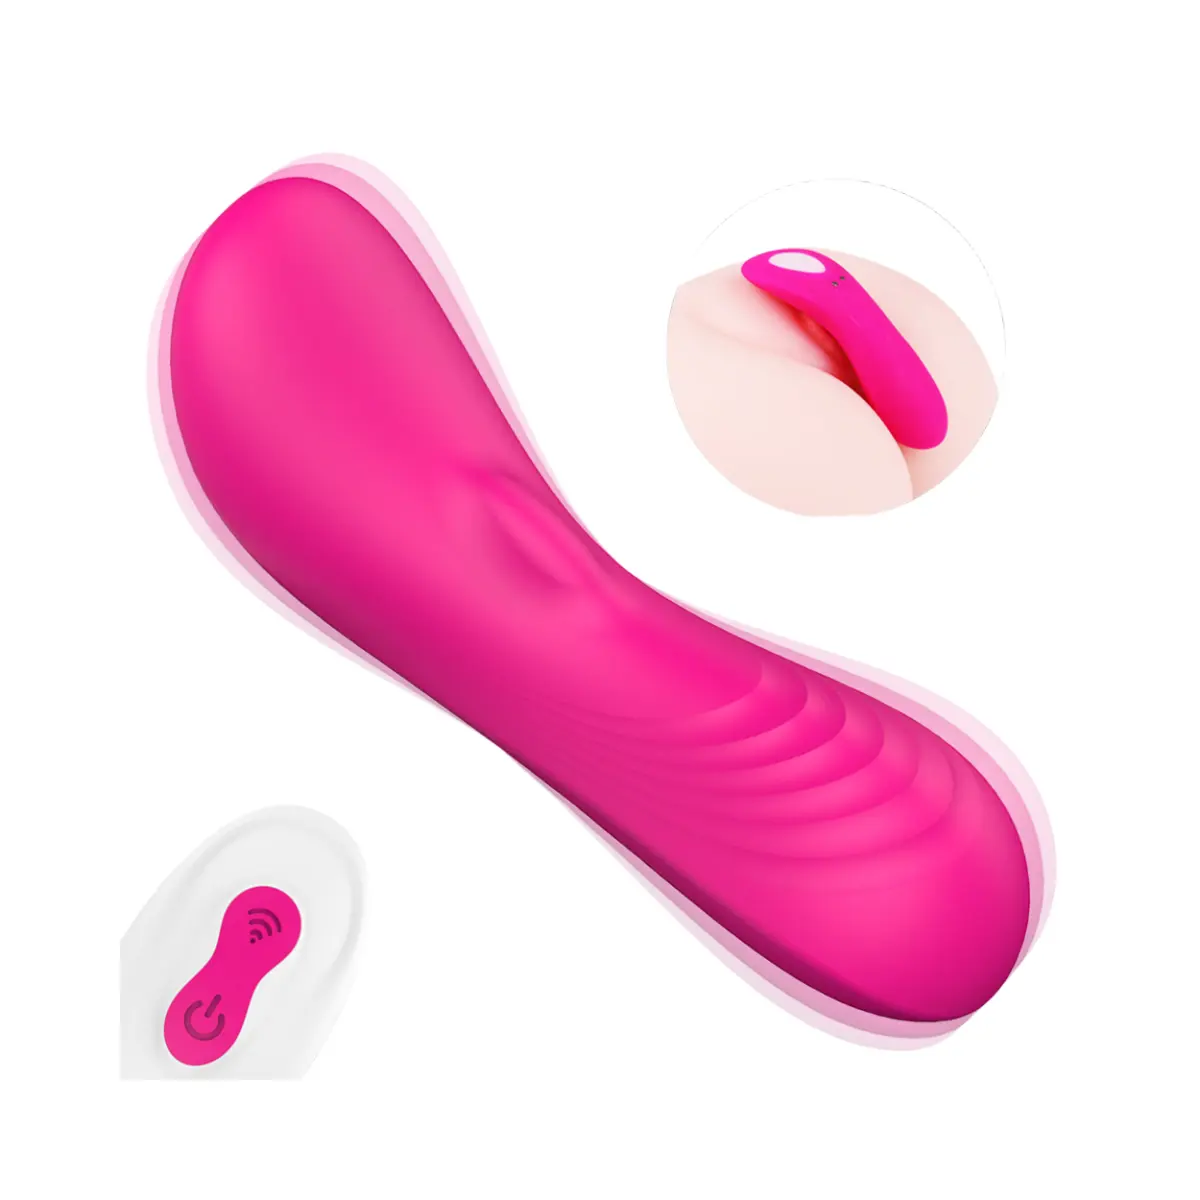 Panty Vibrator 9 Speeds Rechargeable Wireless Remote Control Vibrating Love Egg Clitoral Stimulation Wearable Vibrator